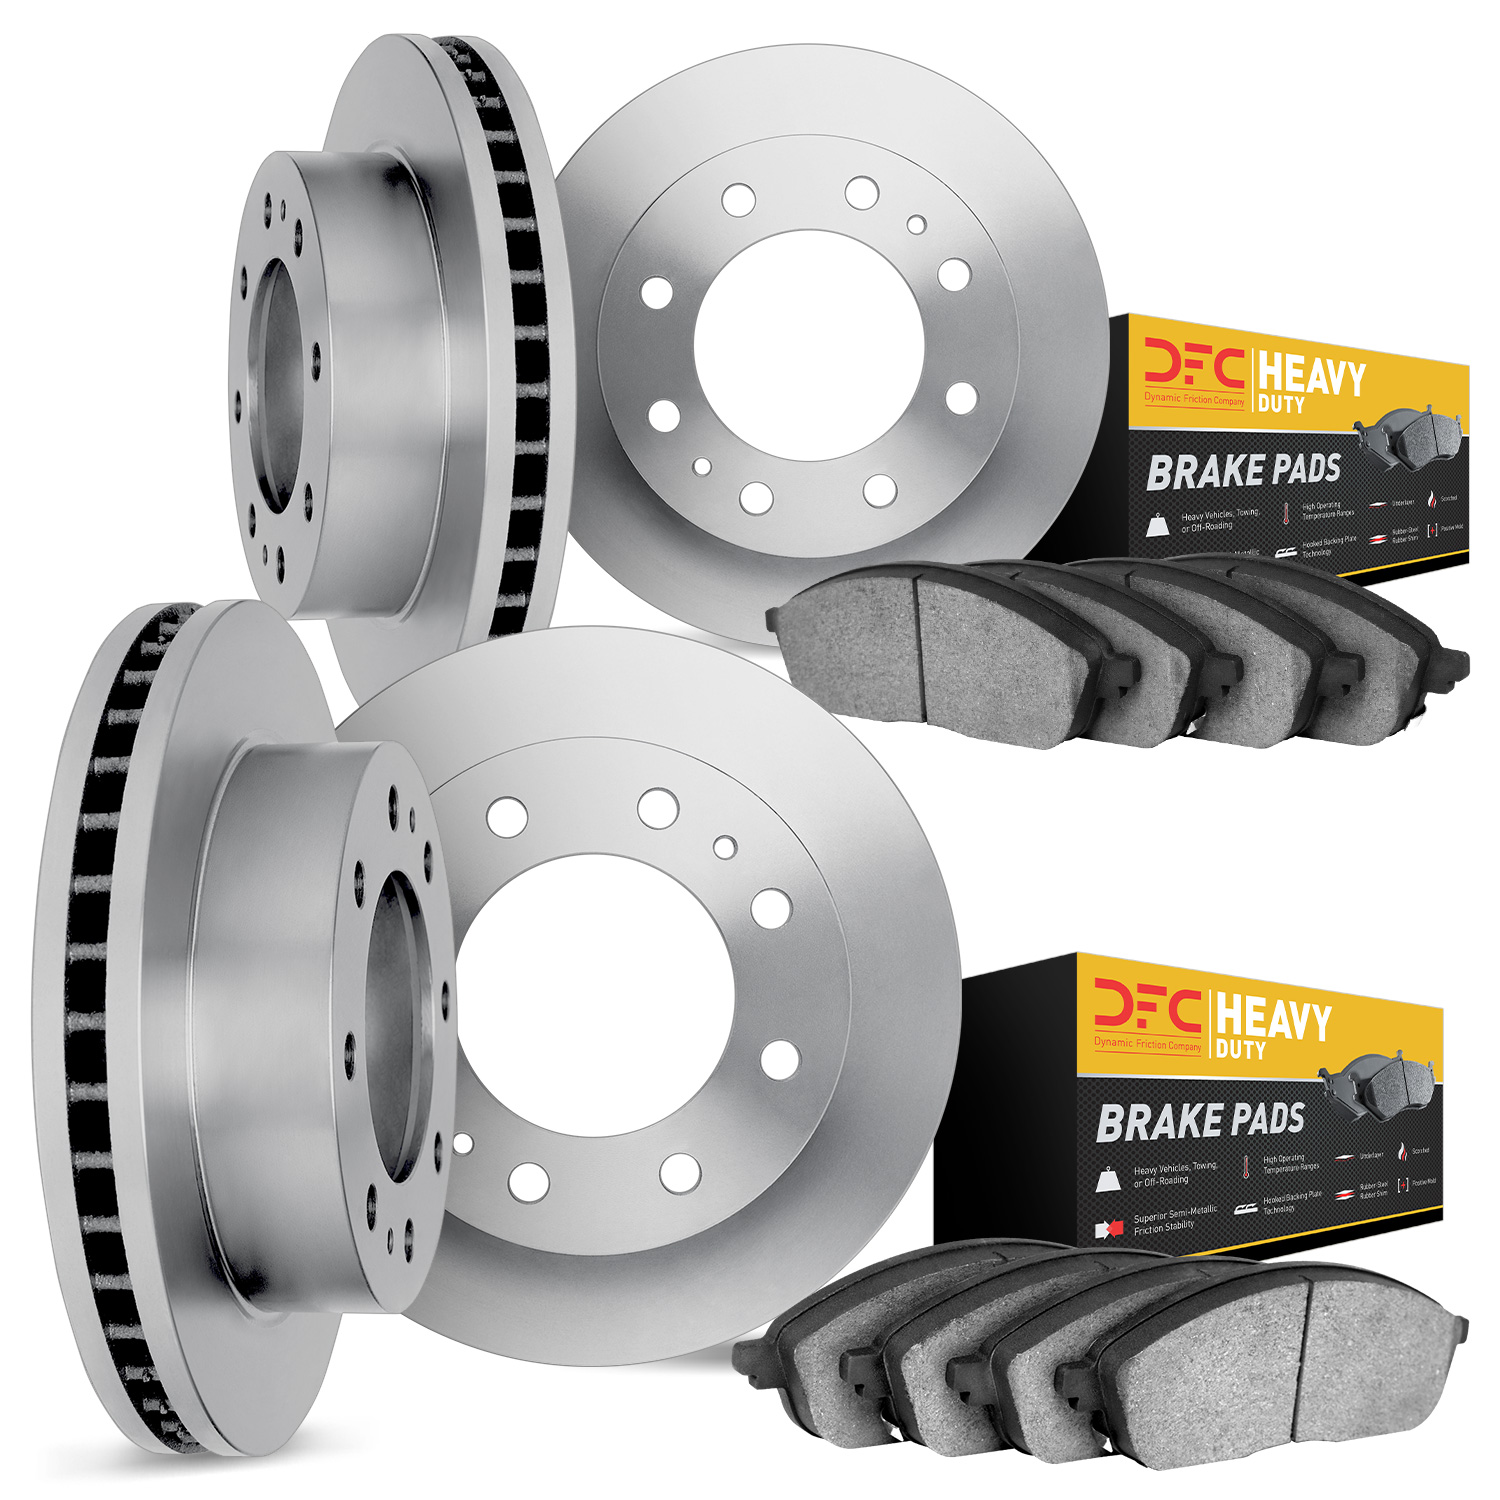 6204-99336 Brake Rotors w/Heavy-Duty Brake Pads Kit, Fits Select Ford/Lincoln/Mercury/Mazda, Position: Front and Rear